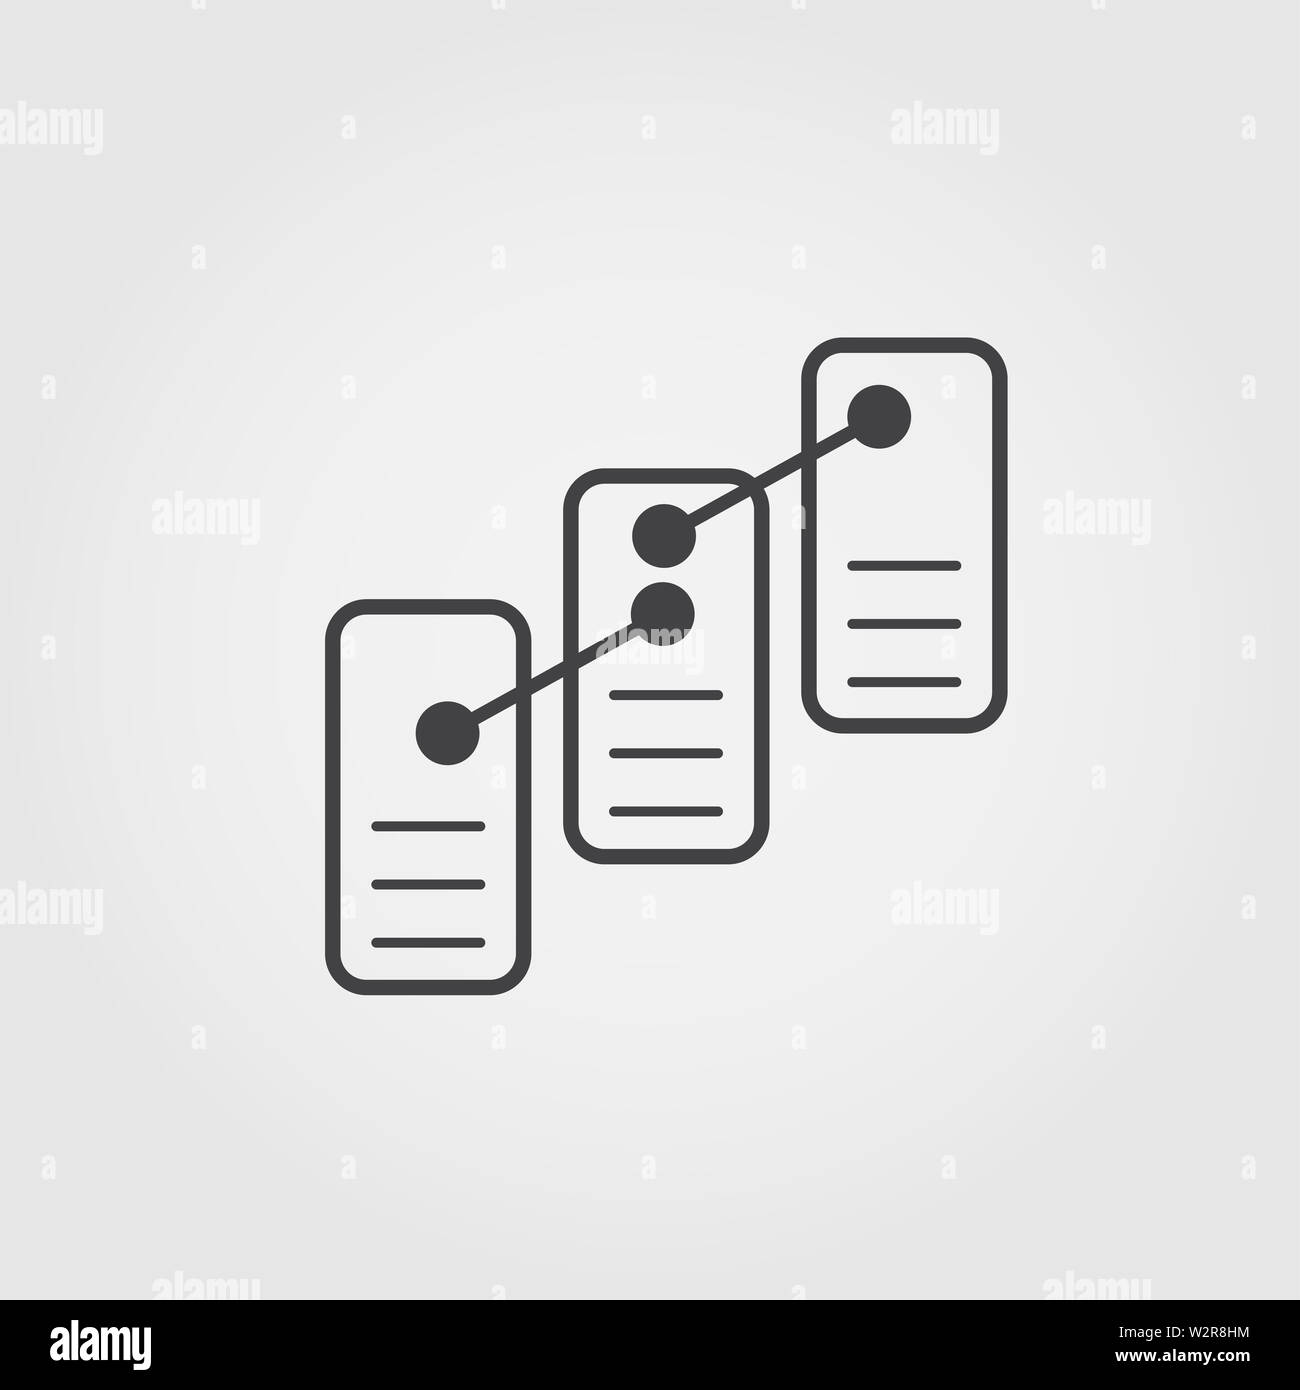 Ordered Records flat icon. Monochrome creative design from blockchain icons collection. Simple sign illustration ordered records icon for mobile and Stock Photo